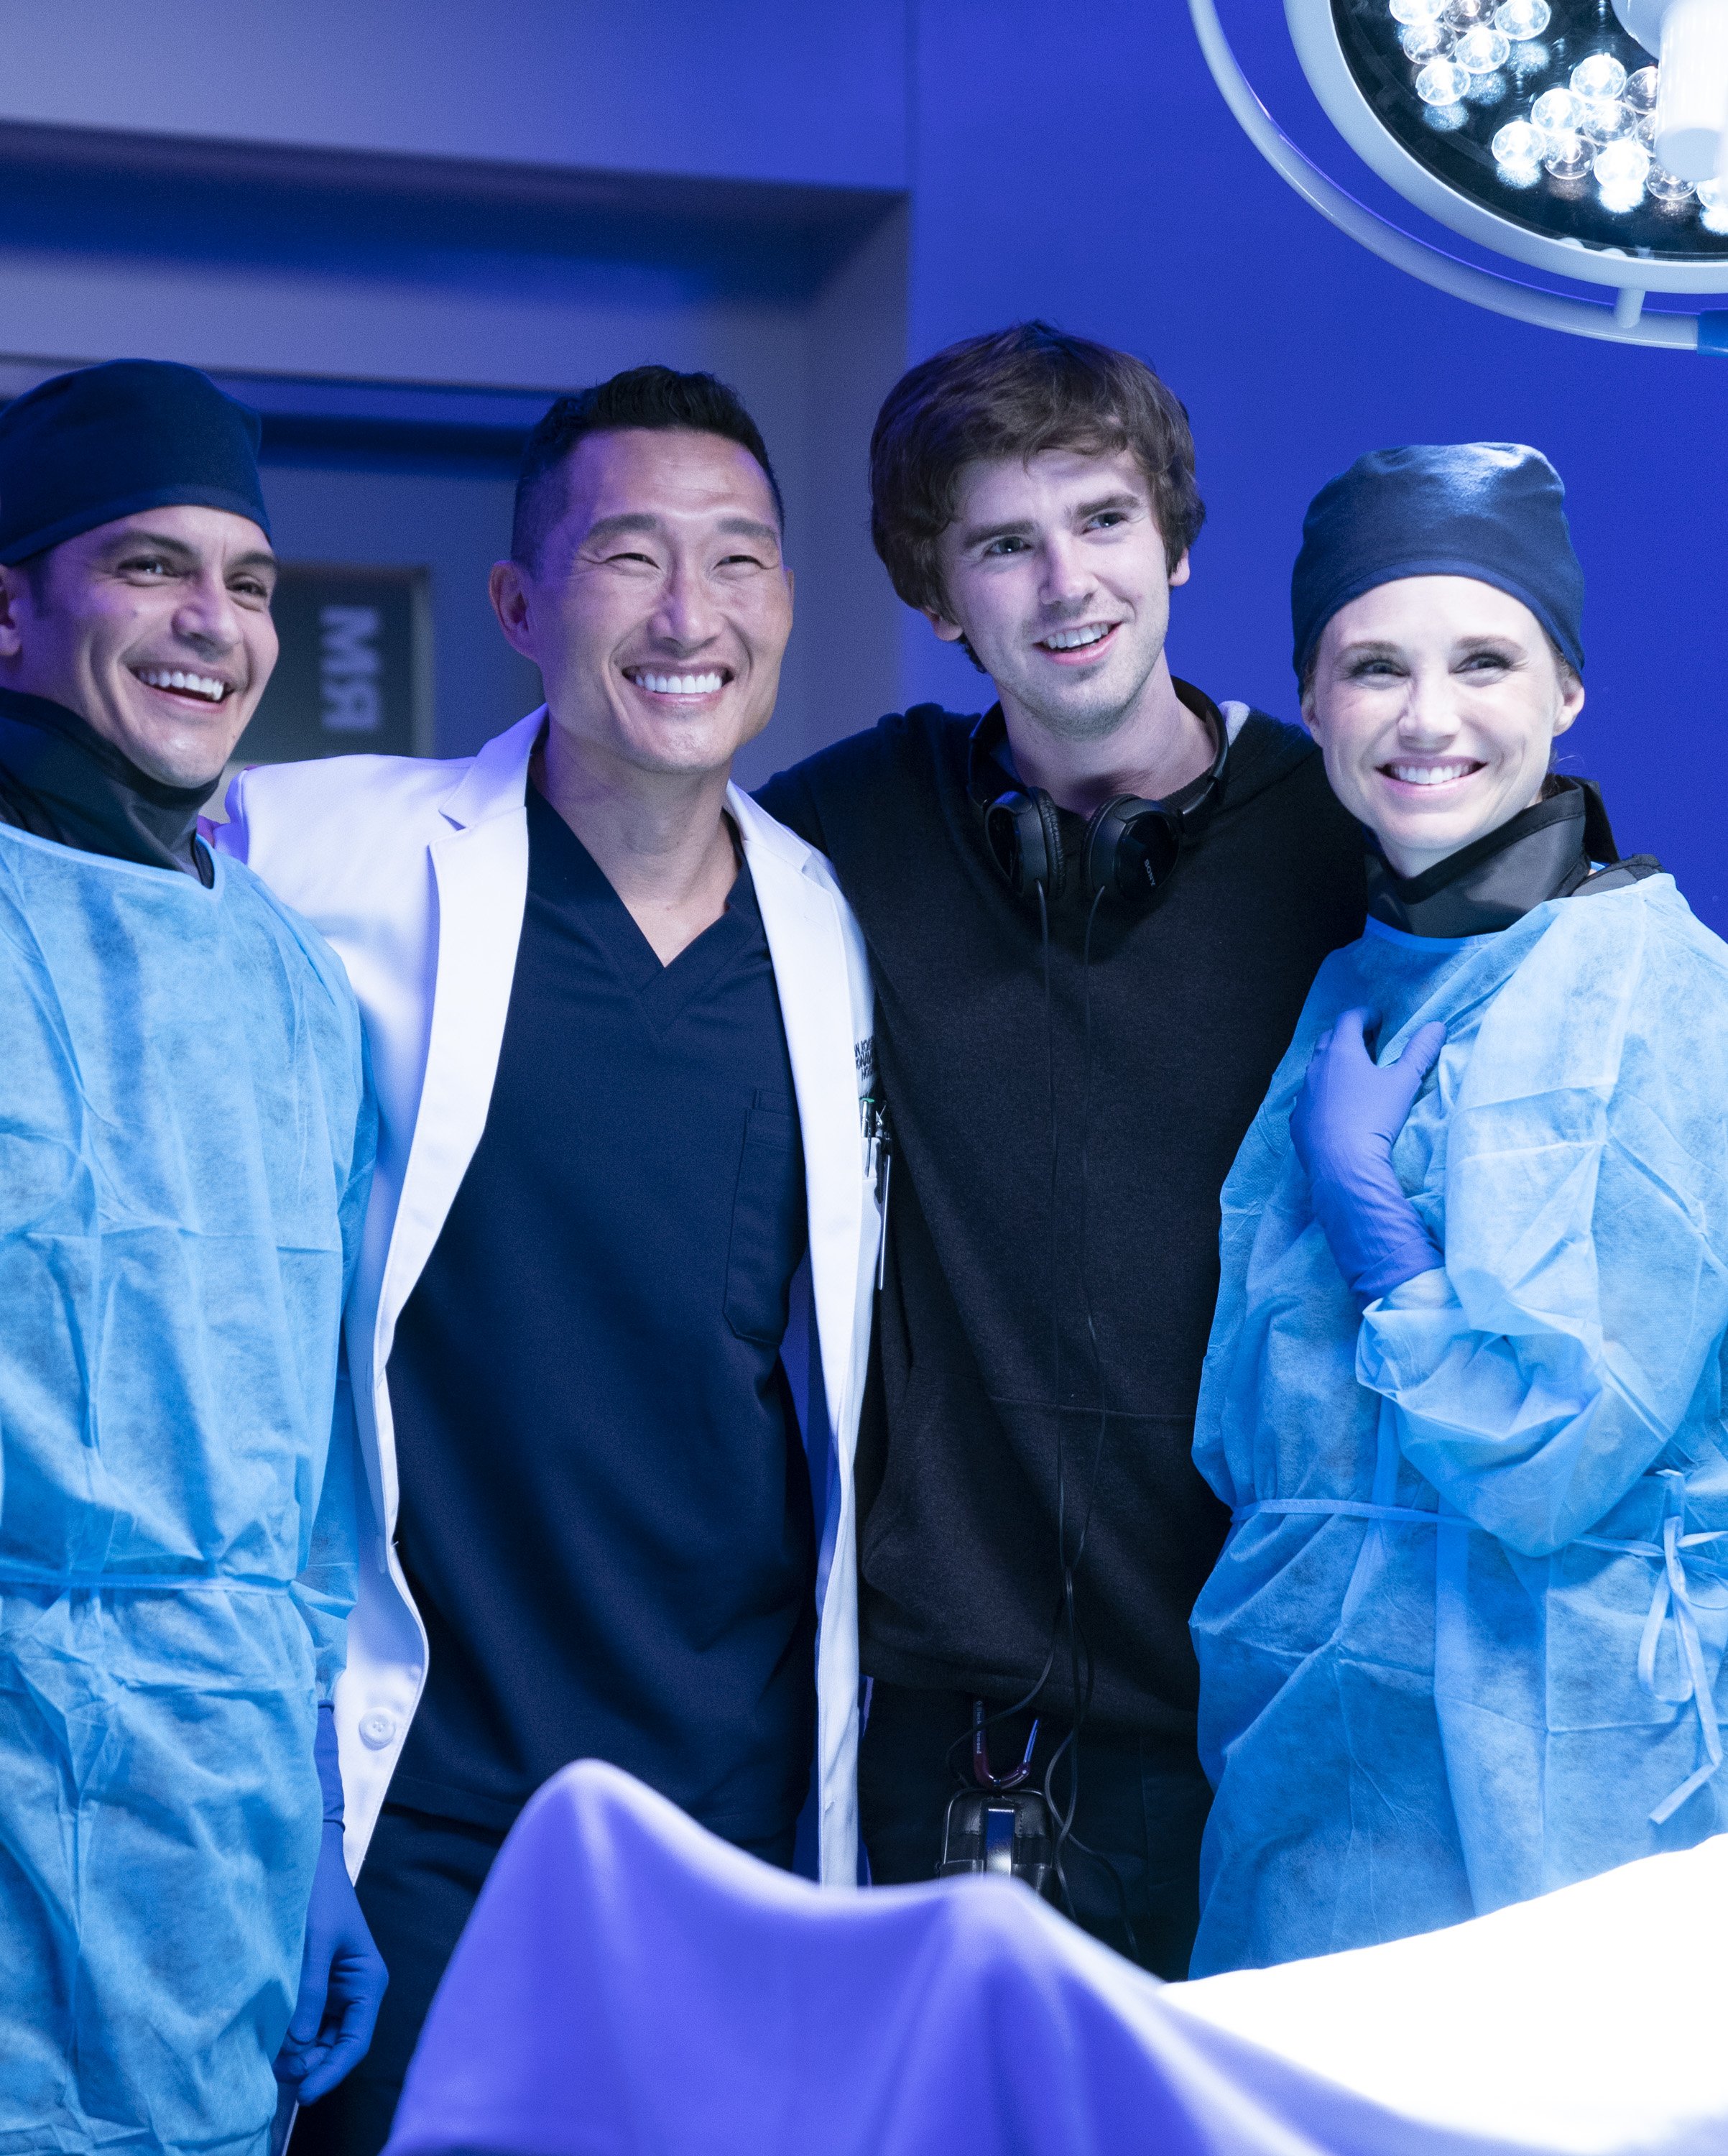  Daniel Dae Kim as Dr. Jackson Han in The Good Doctor, for which he also serves as executive producer ( photos by David Bukach/ABC/Courtesy of Sony Pictures Television ).  